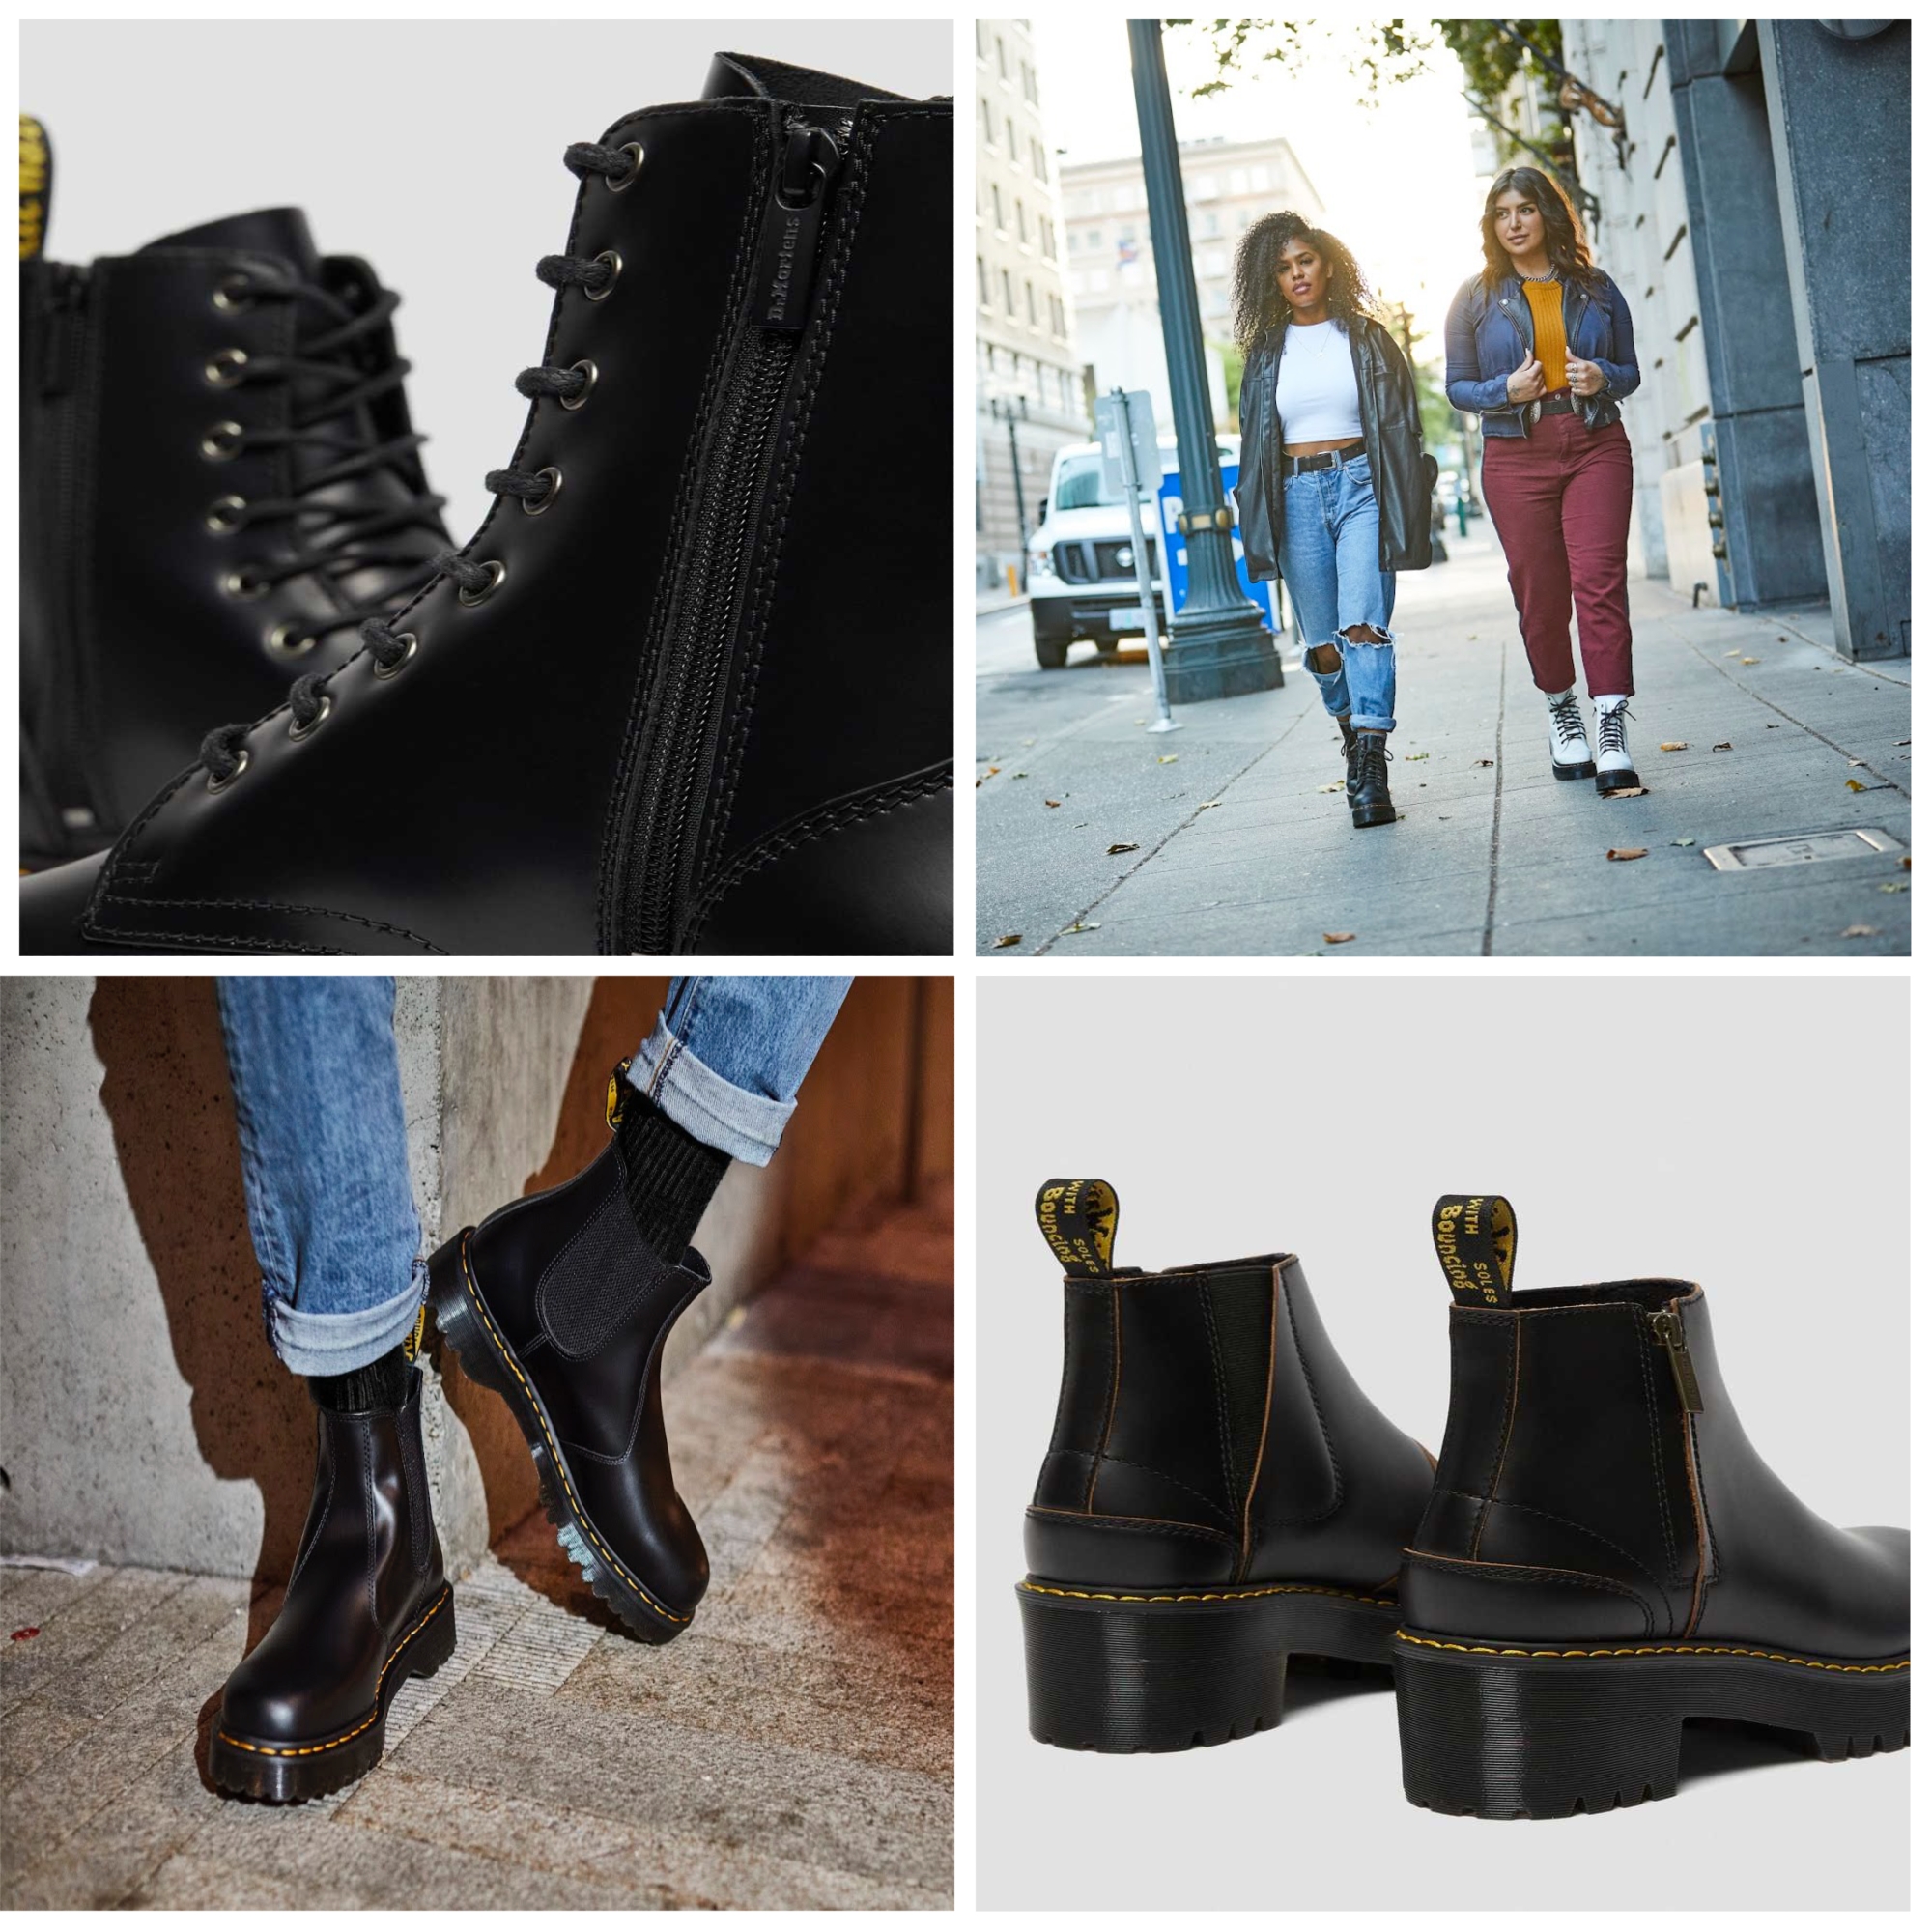 Dr Martens Has All The Best Styles For Your Girlfriend This Holiday 6664